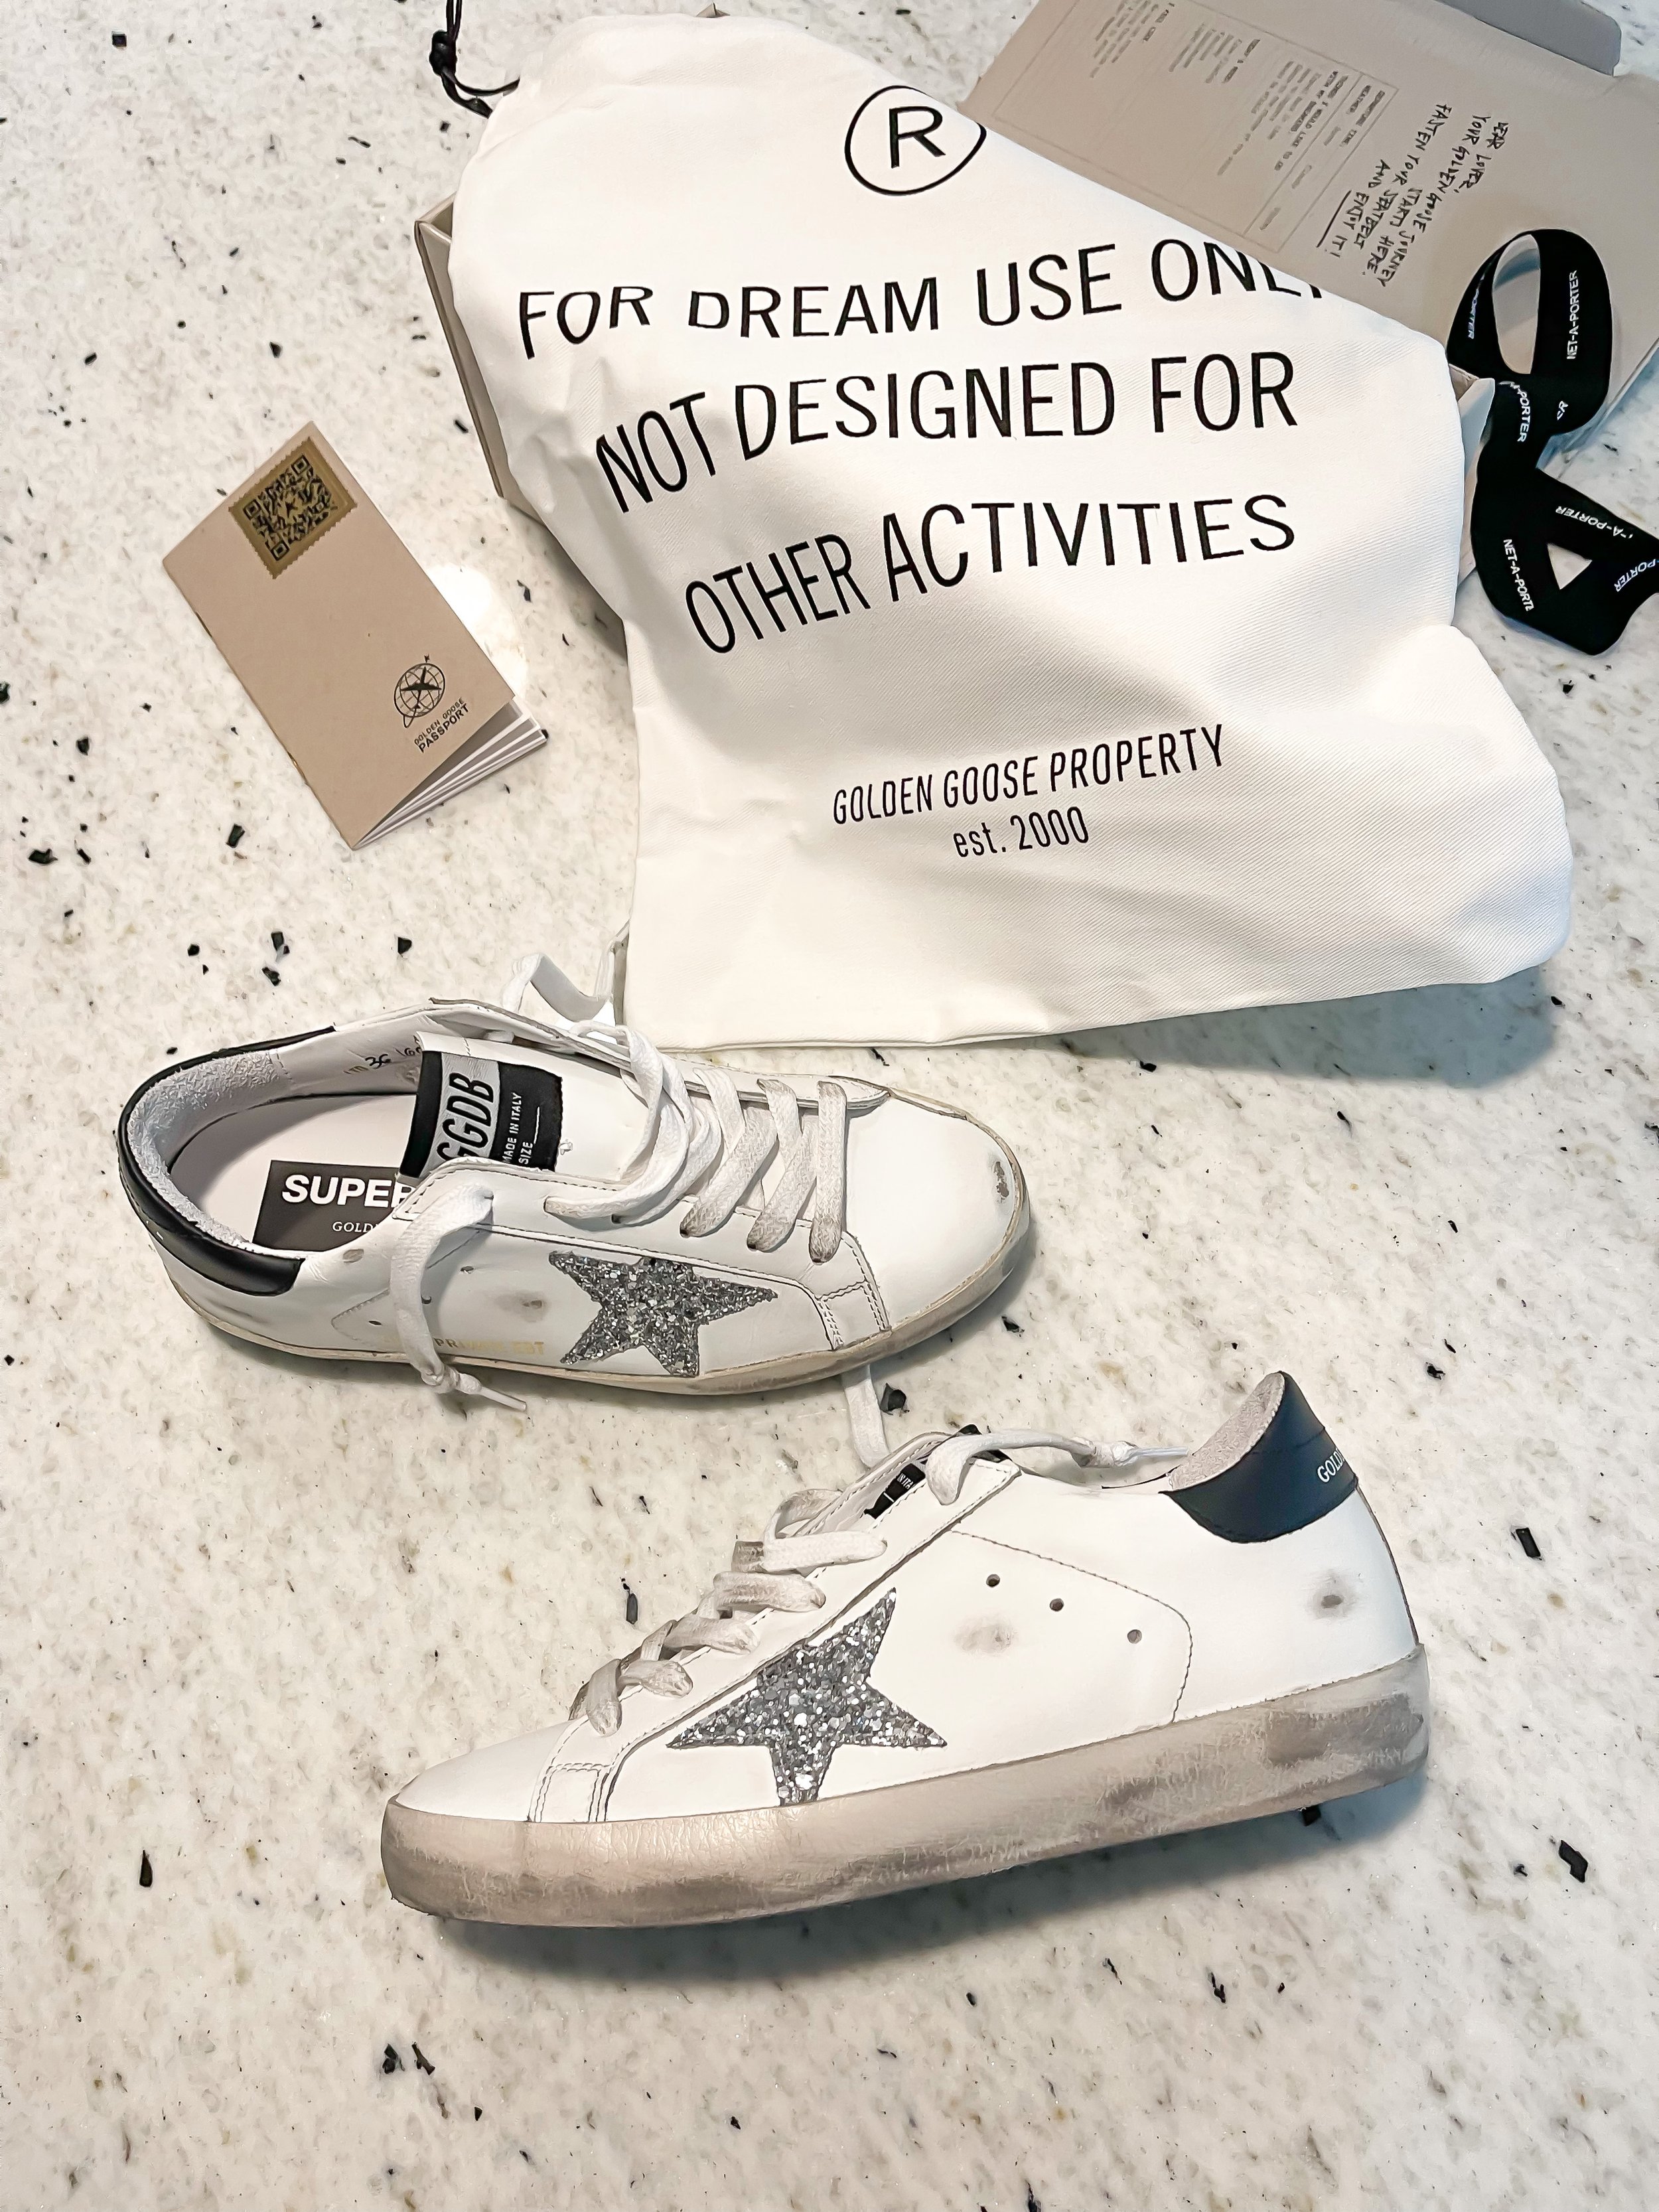 Are Golden Goose Sneakers Worth It? Honest Review... — The Jess Tayls